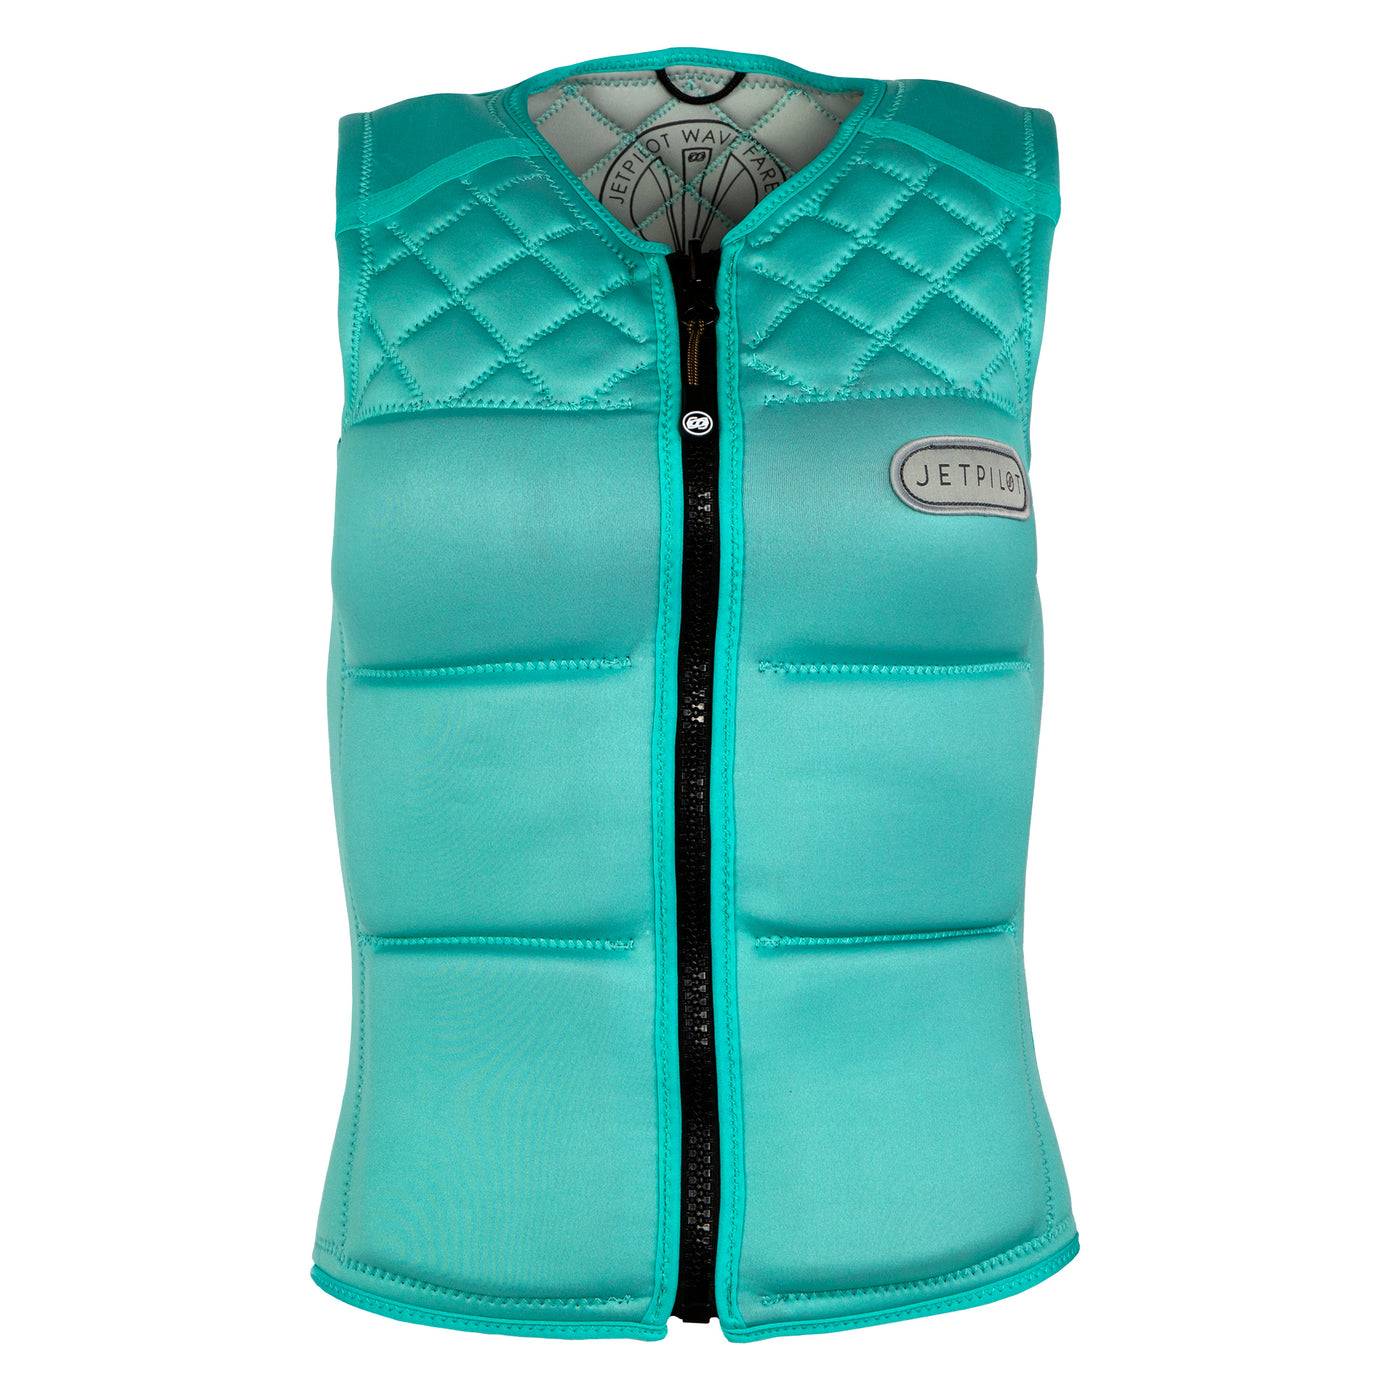 Front view of the Wave Farer comp vest in the Wave Sea colorway.